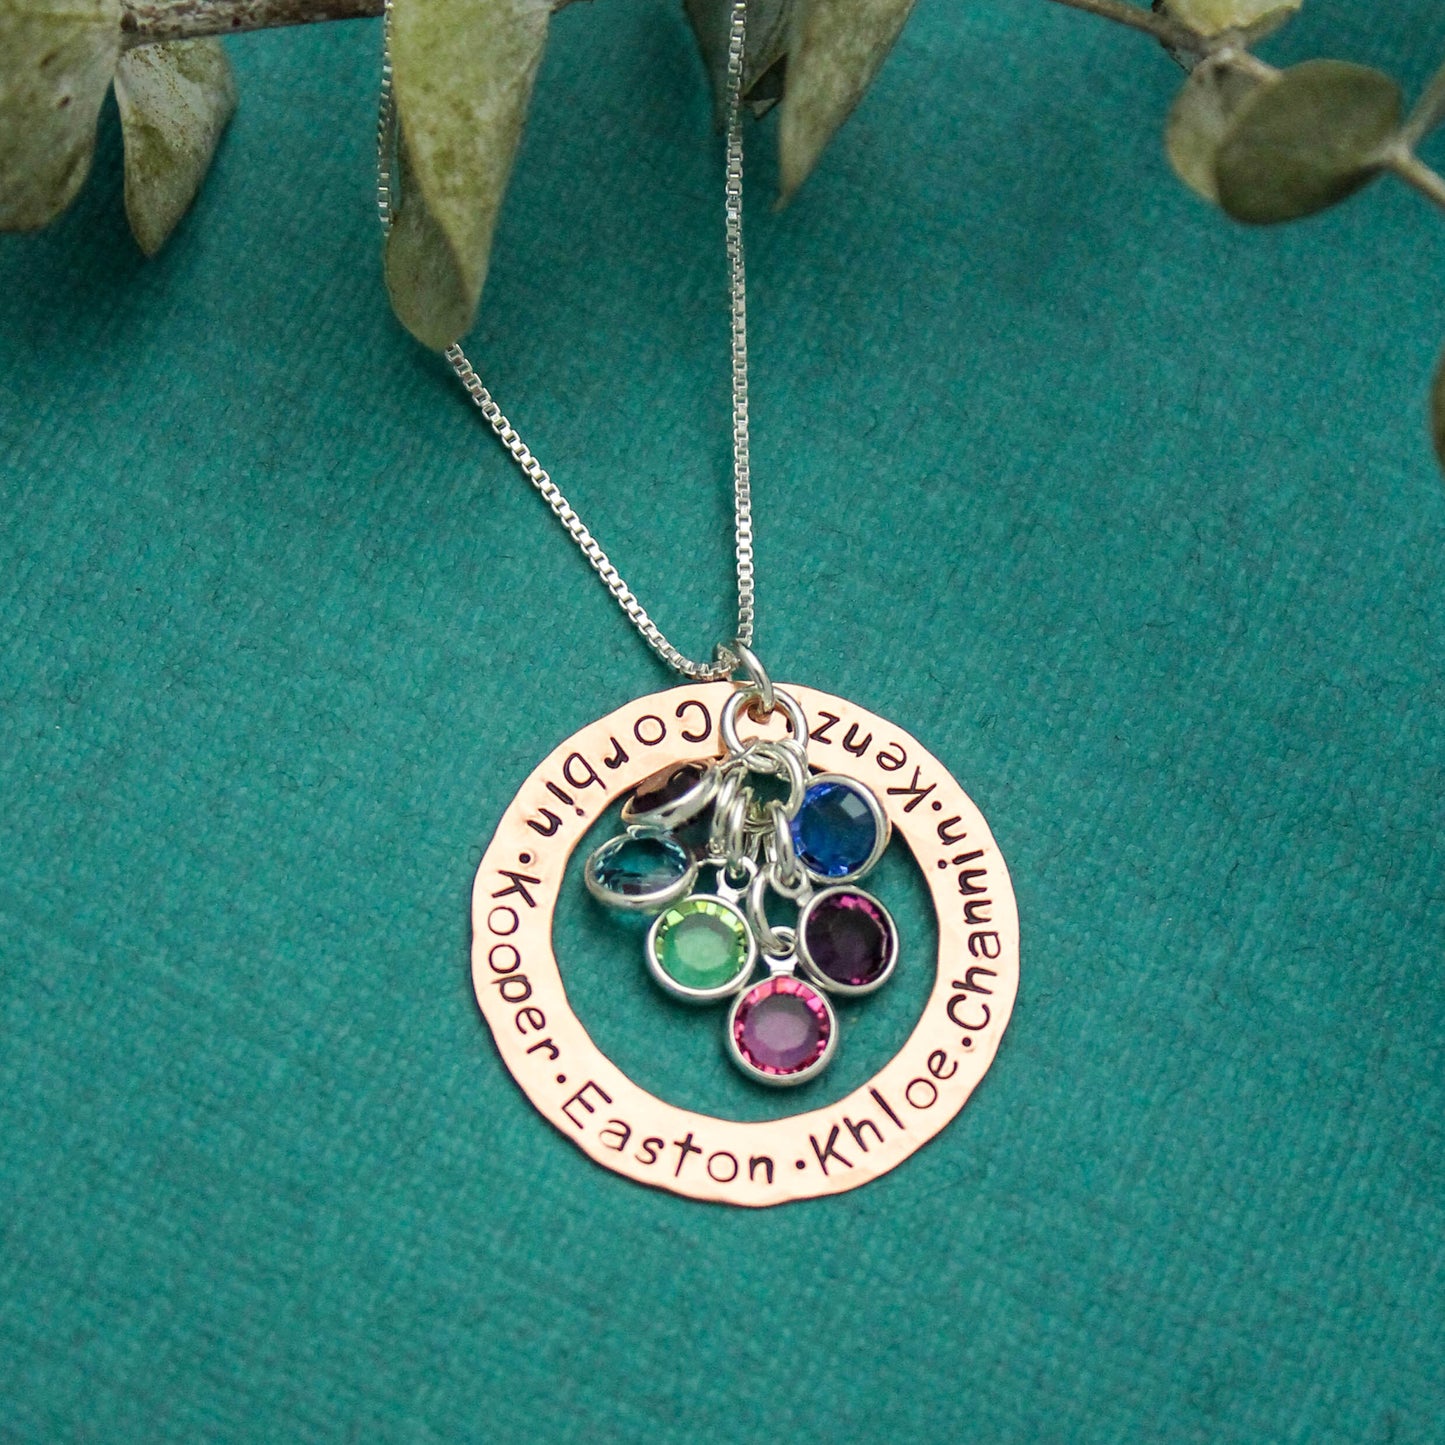 Personalized Mother Necklace, Copper Washer Mommy Necklace with Birthstones, Birthstone Jewelry, Mother's Day Gift, Hand Stamped Jewelry